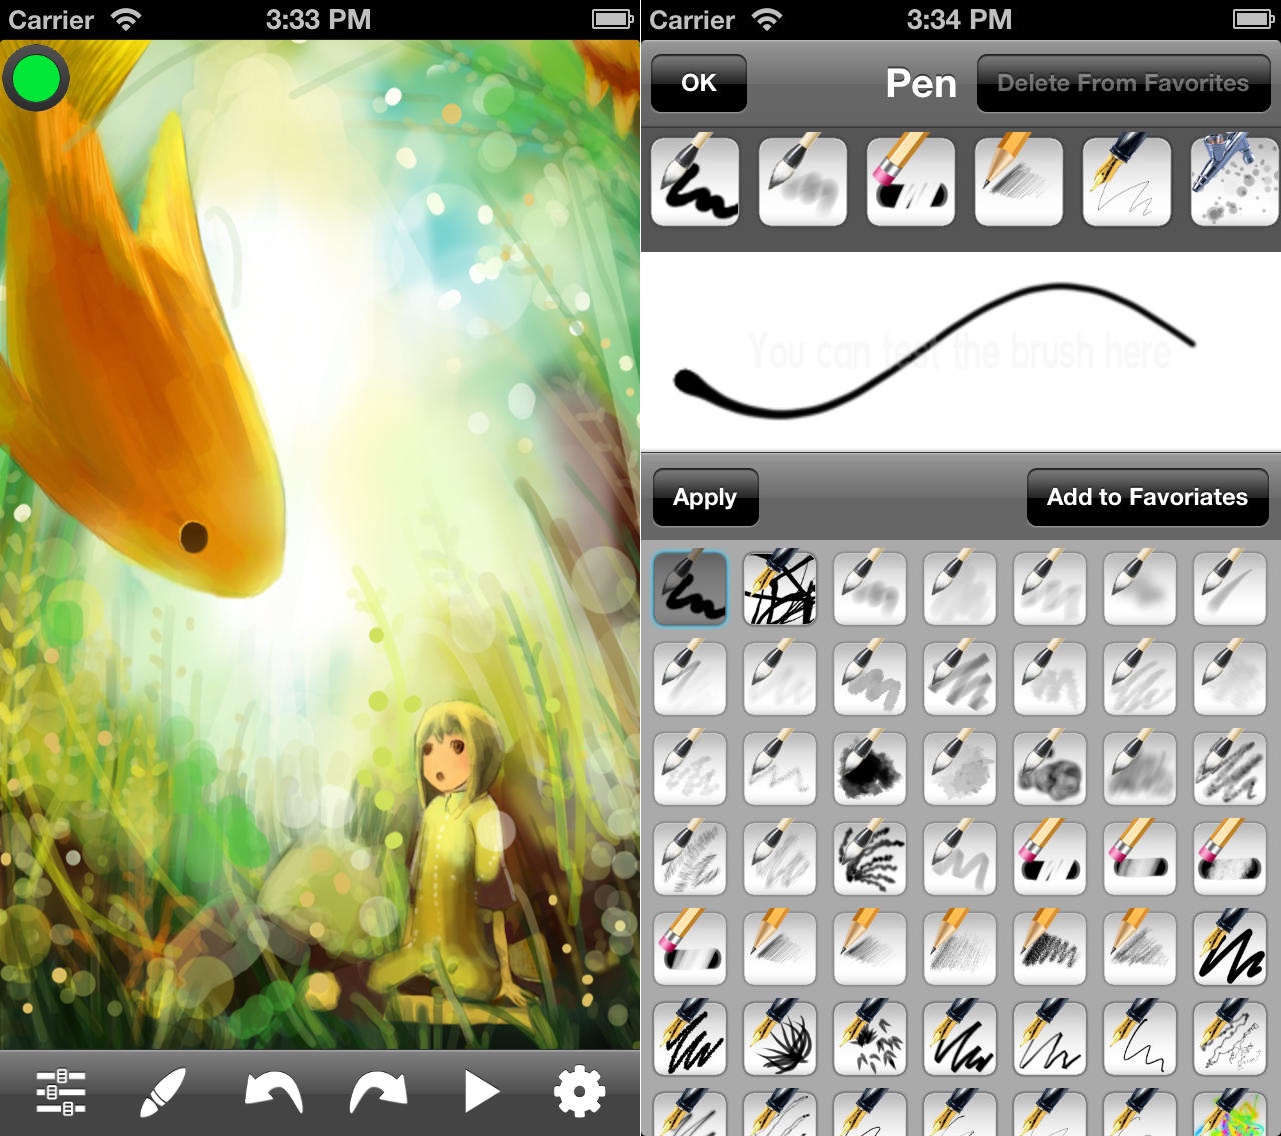 Deals of the day on the App Store: MyBrushes Pro, Widget Calendar, Dwelp and more!